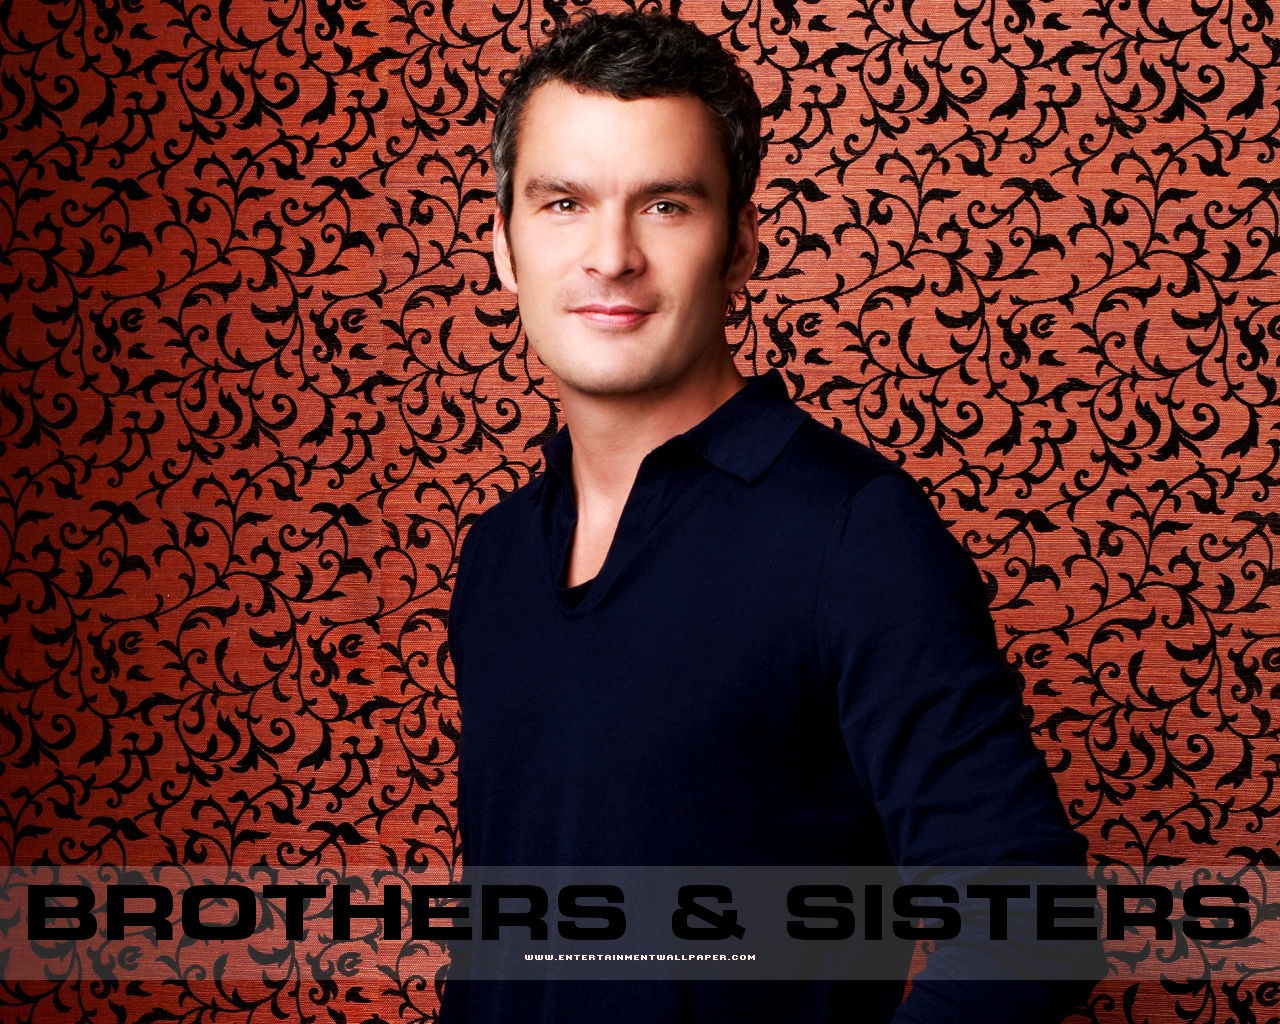 Brothers & Sisters 兄弟姐妹 #17 - 1280x1024